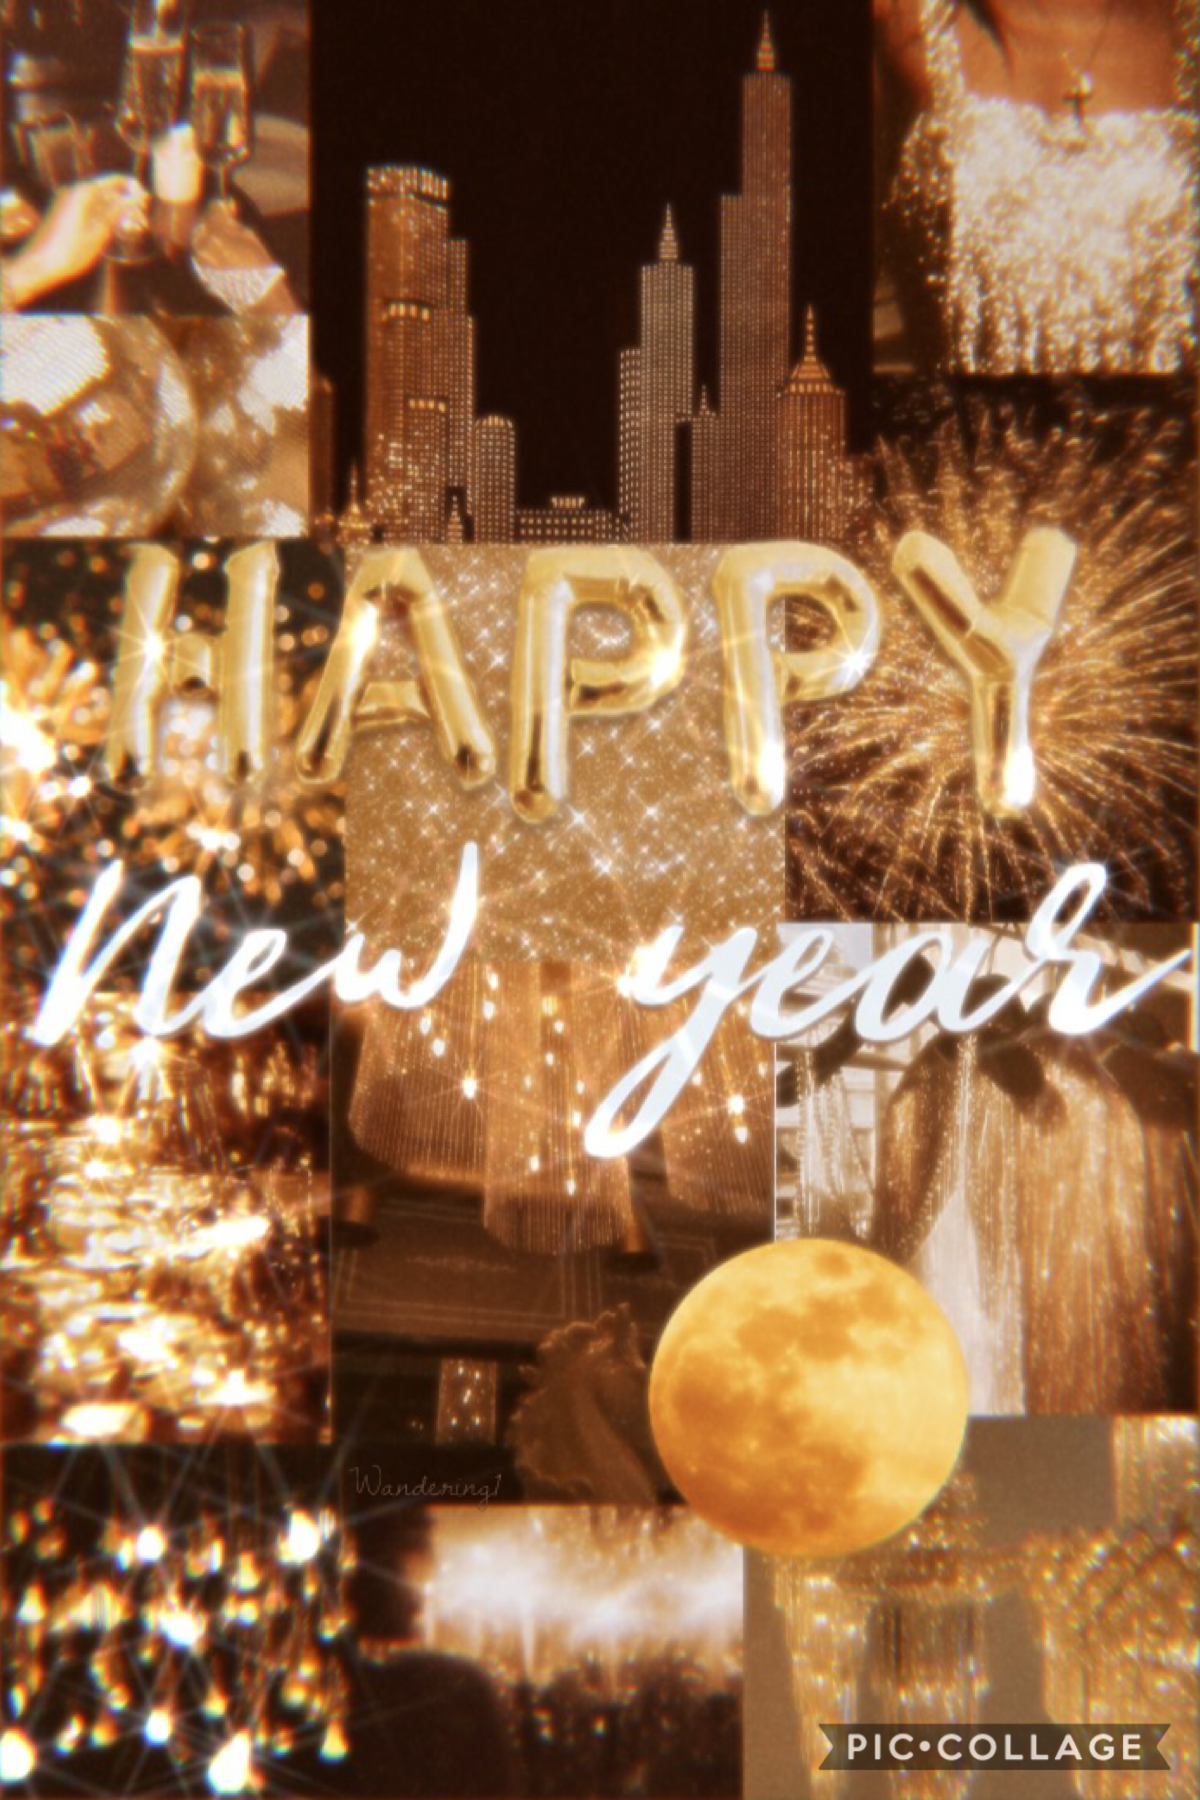 ✨ Happy New Year ✨
Good bye 2020
Hello 2021
I hope you all have a wonderful new year! 
Sending you lots of love
~ wandering1 
